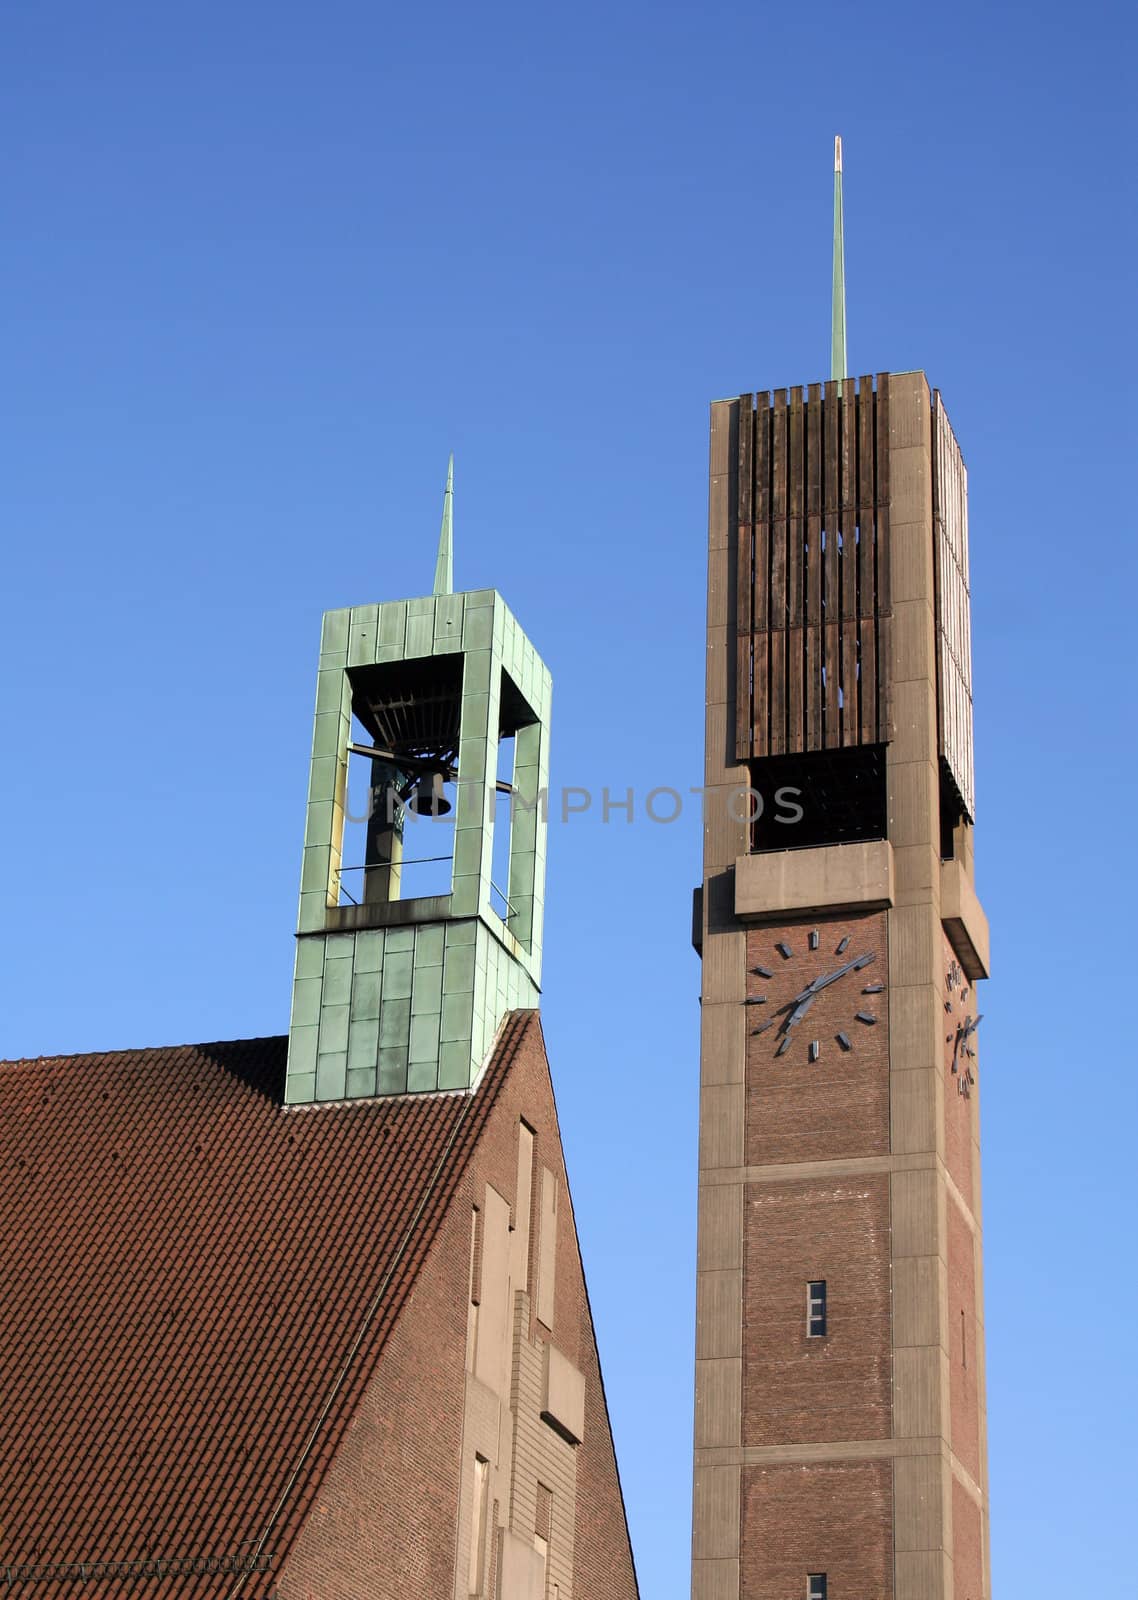 The two towers of the protestant Christuskirche in Hamburg-Wandsbek, built in the middle of the 20th century.